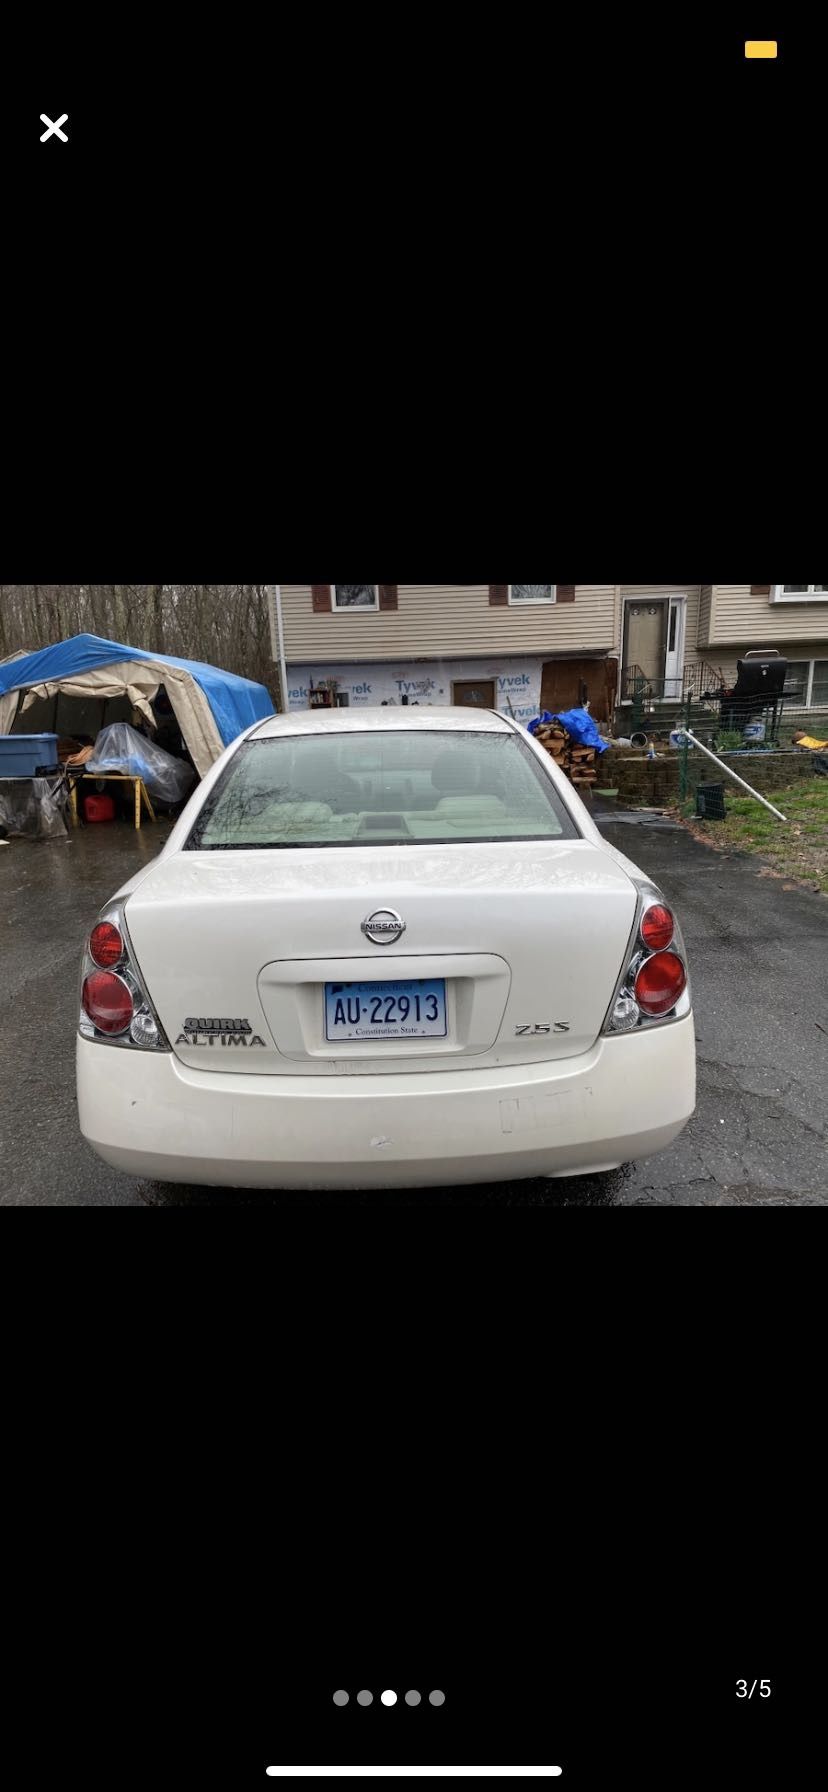 2005 Nissan Altima sedan, 150k miles, automatic transmission, new Bluetooth stereo, new headlights just put in, just got a tune up, oil change and in